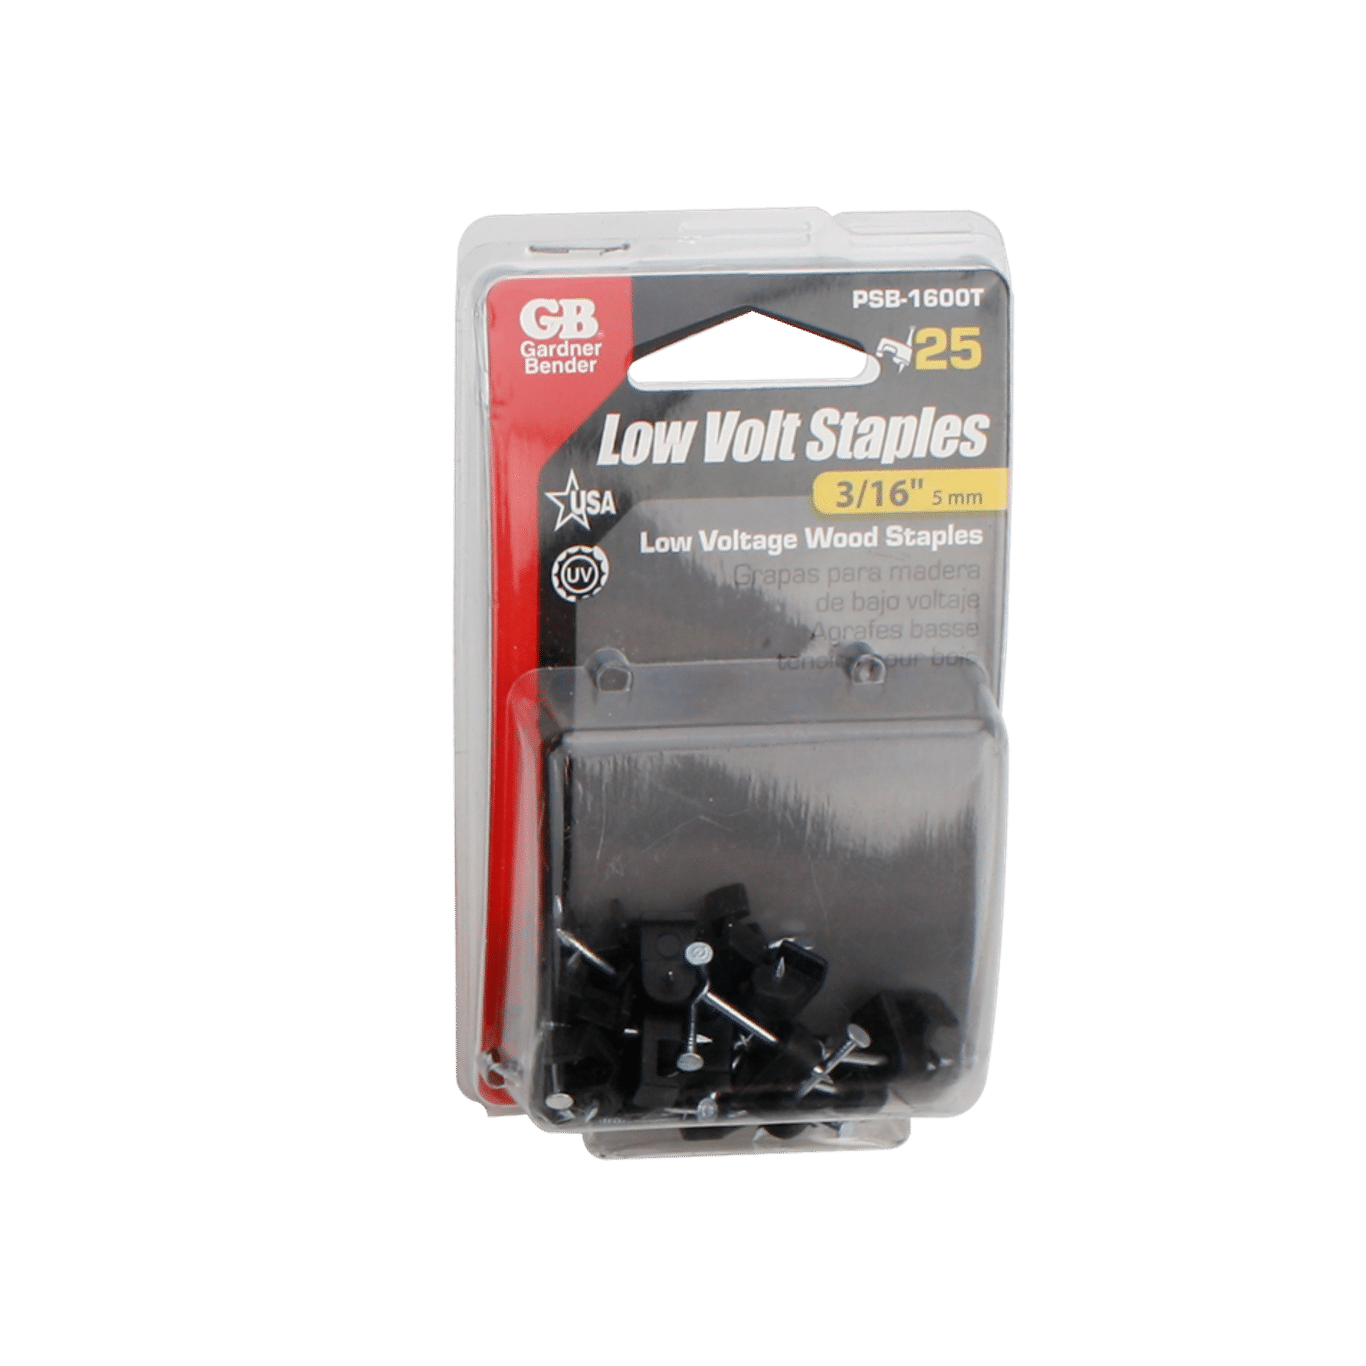 Electrical Rough-In Part 3/16" or 5mm Low-Volt Staples (Pack of 25) FHE-ROUGH-IN-STL